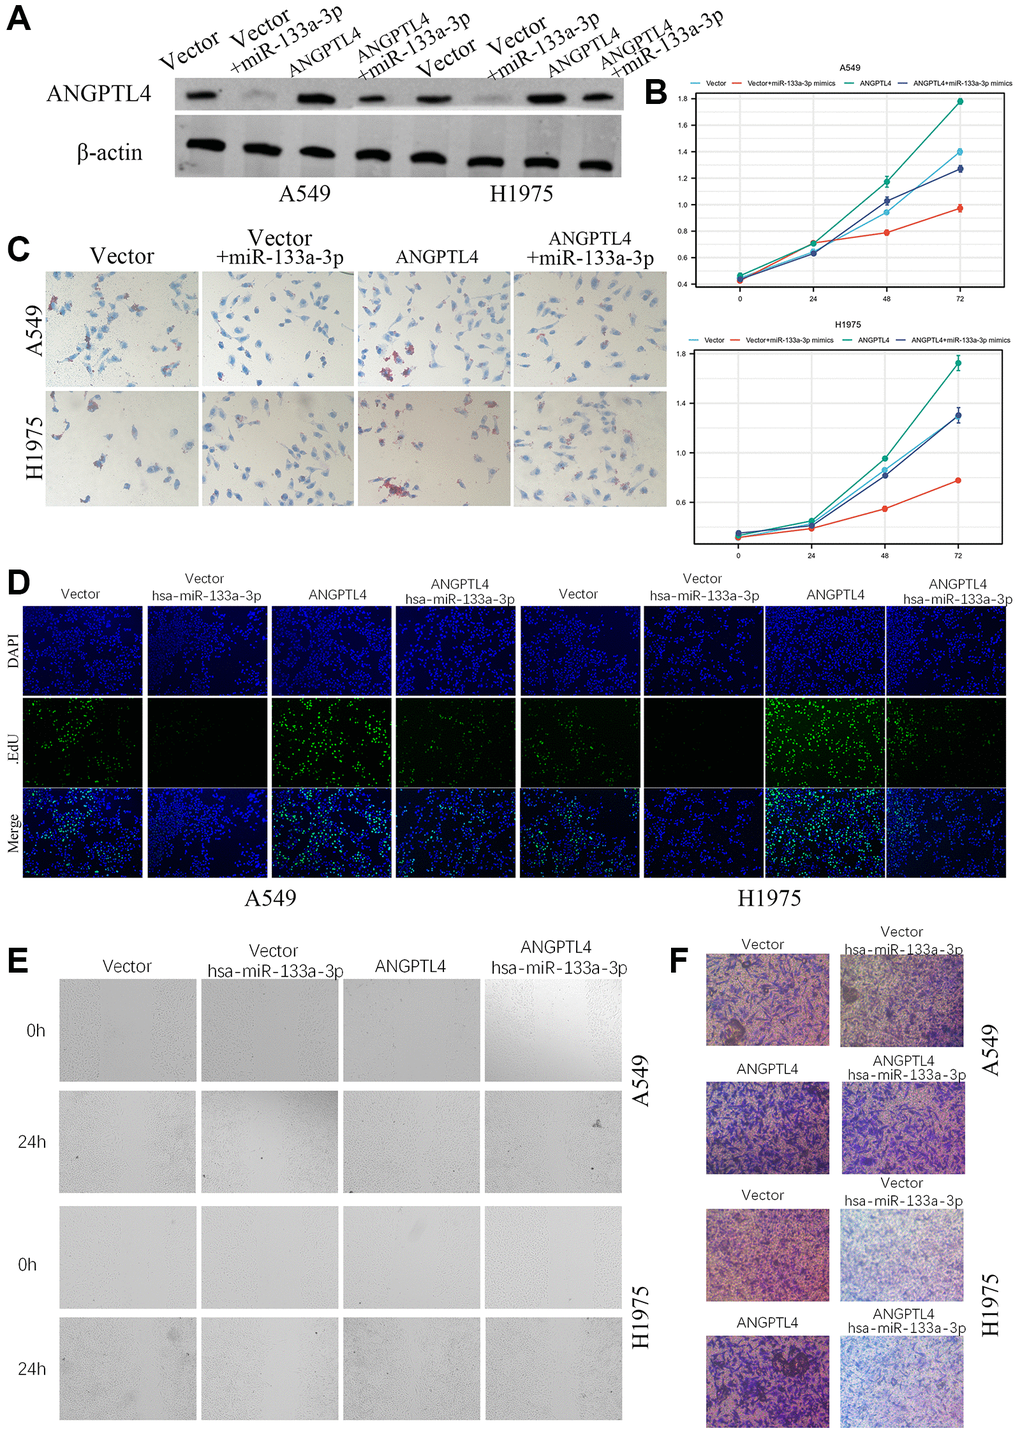 The role of miR-133a-3p/ANGPTL4 axis in LUAD cell proliferation and invasion. (A) The ANGPTL4 protein expression was confirmed by Western blot. (B) The effect of miR-133a-3p/ANGPTL4 axis on LUAD cell proliferation by MTT. (C) The effect of ANGPTL4 KD on lipids metabolism by oil red O. (D) LUAD proliferation ability for miR-133a-3p/ANGPTL4 axis was showed by EdU analysis. The effect of miR-133a-3p/ANGPTL4 axis on LUAD cell migration by wound healing (E) and invasion by Transwell analysis (F).